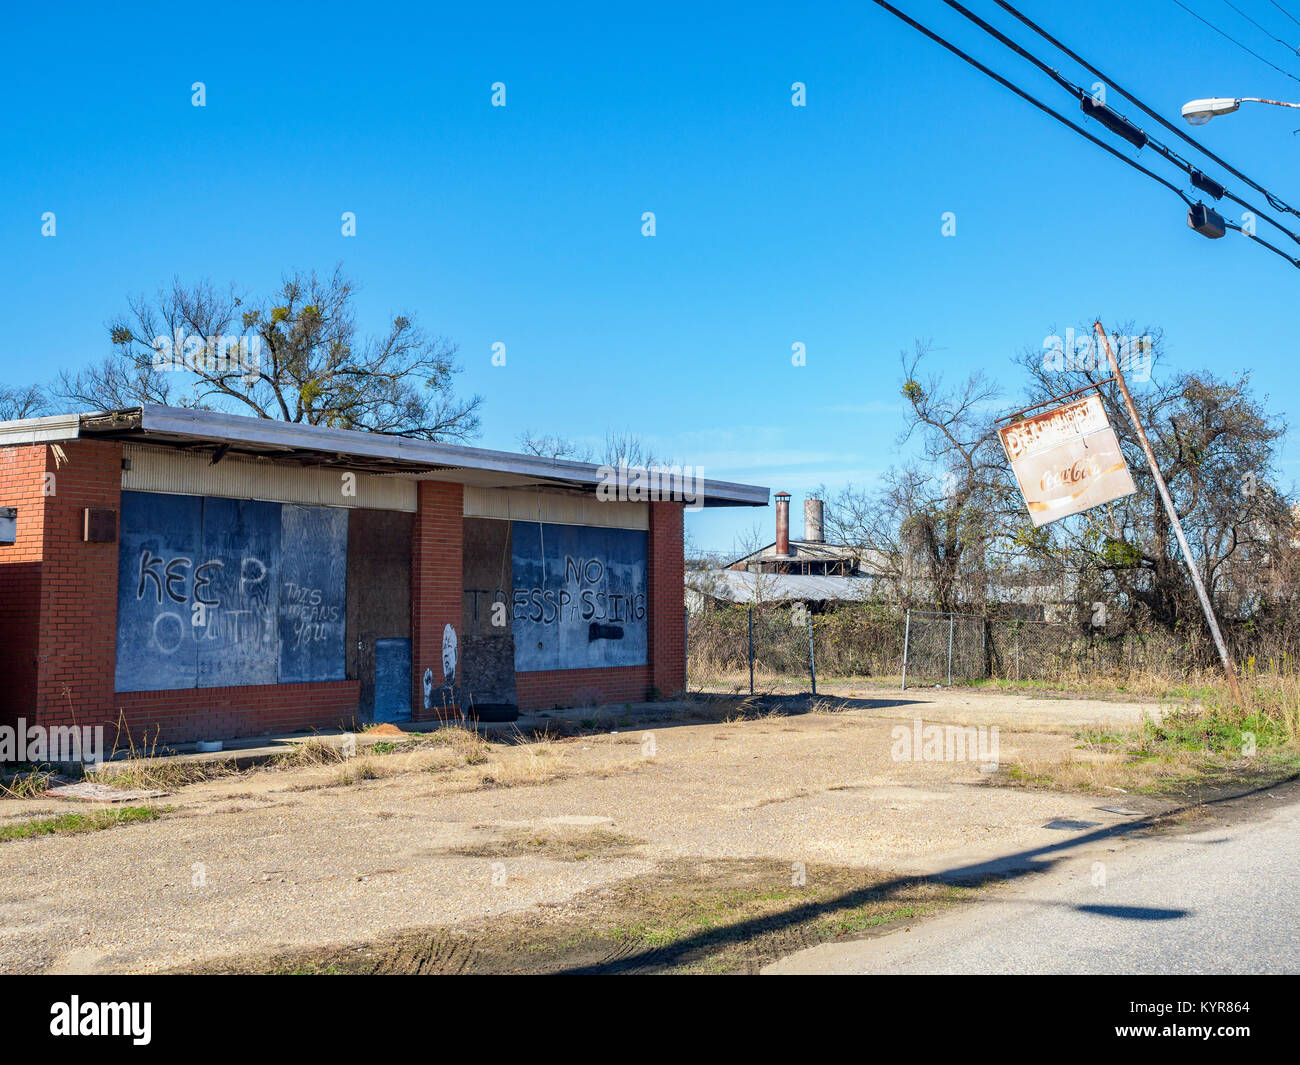 Old boarded up and shuttered small business showing urban decline in Montgomery, Alabama United States. Stock Photo